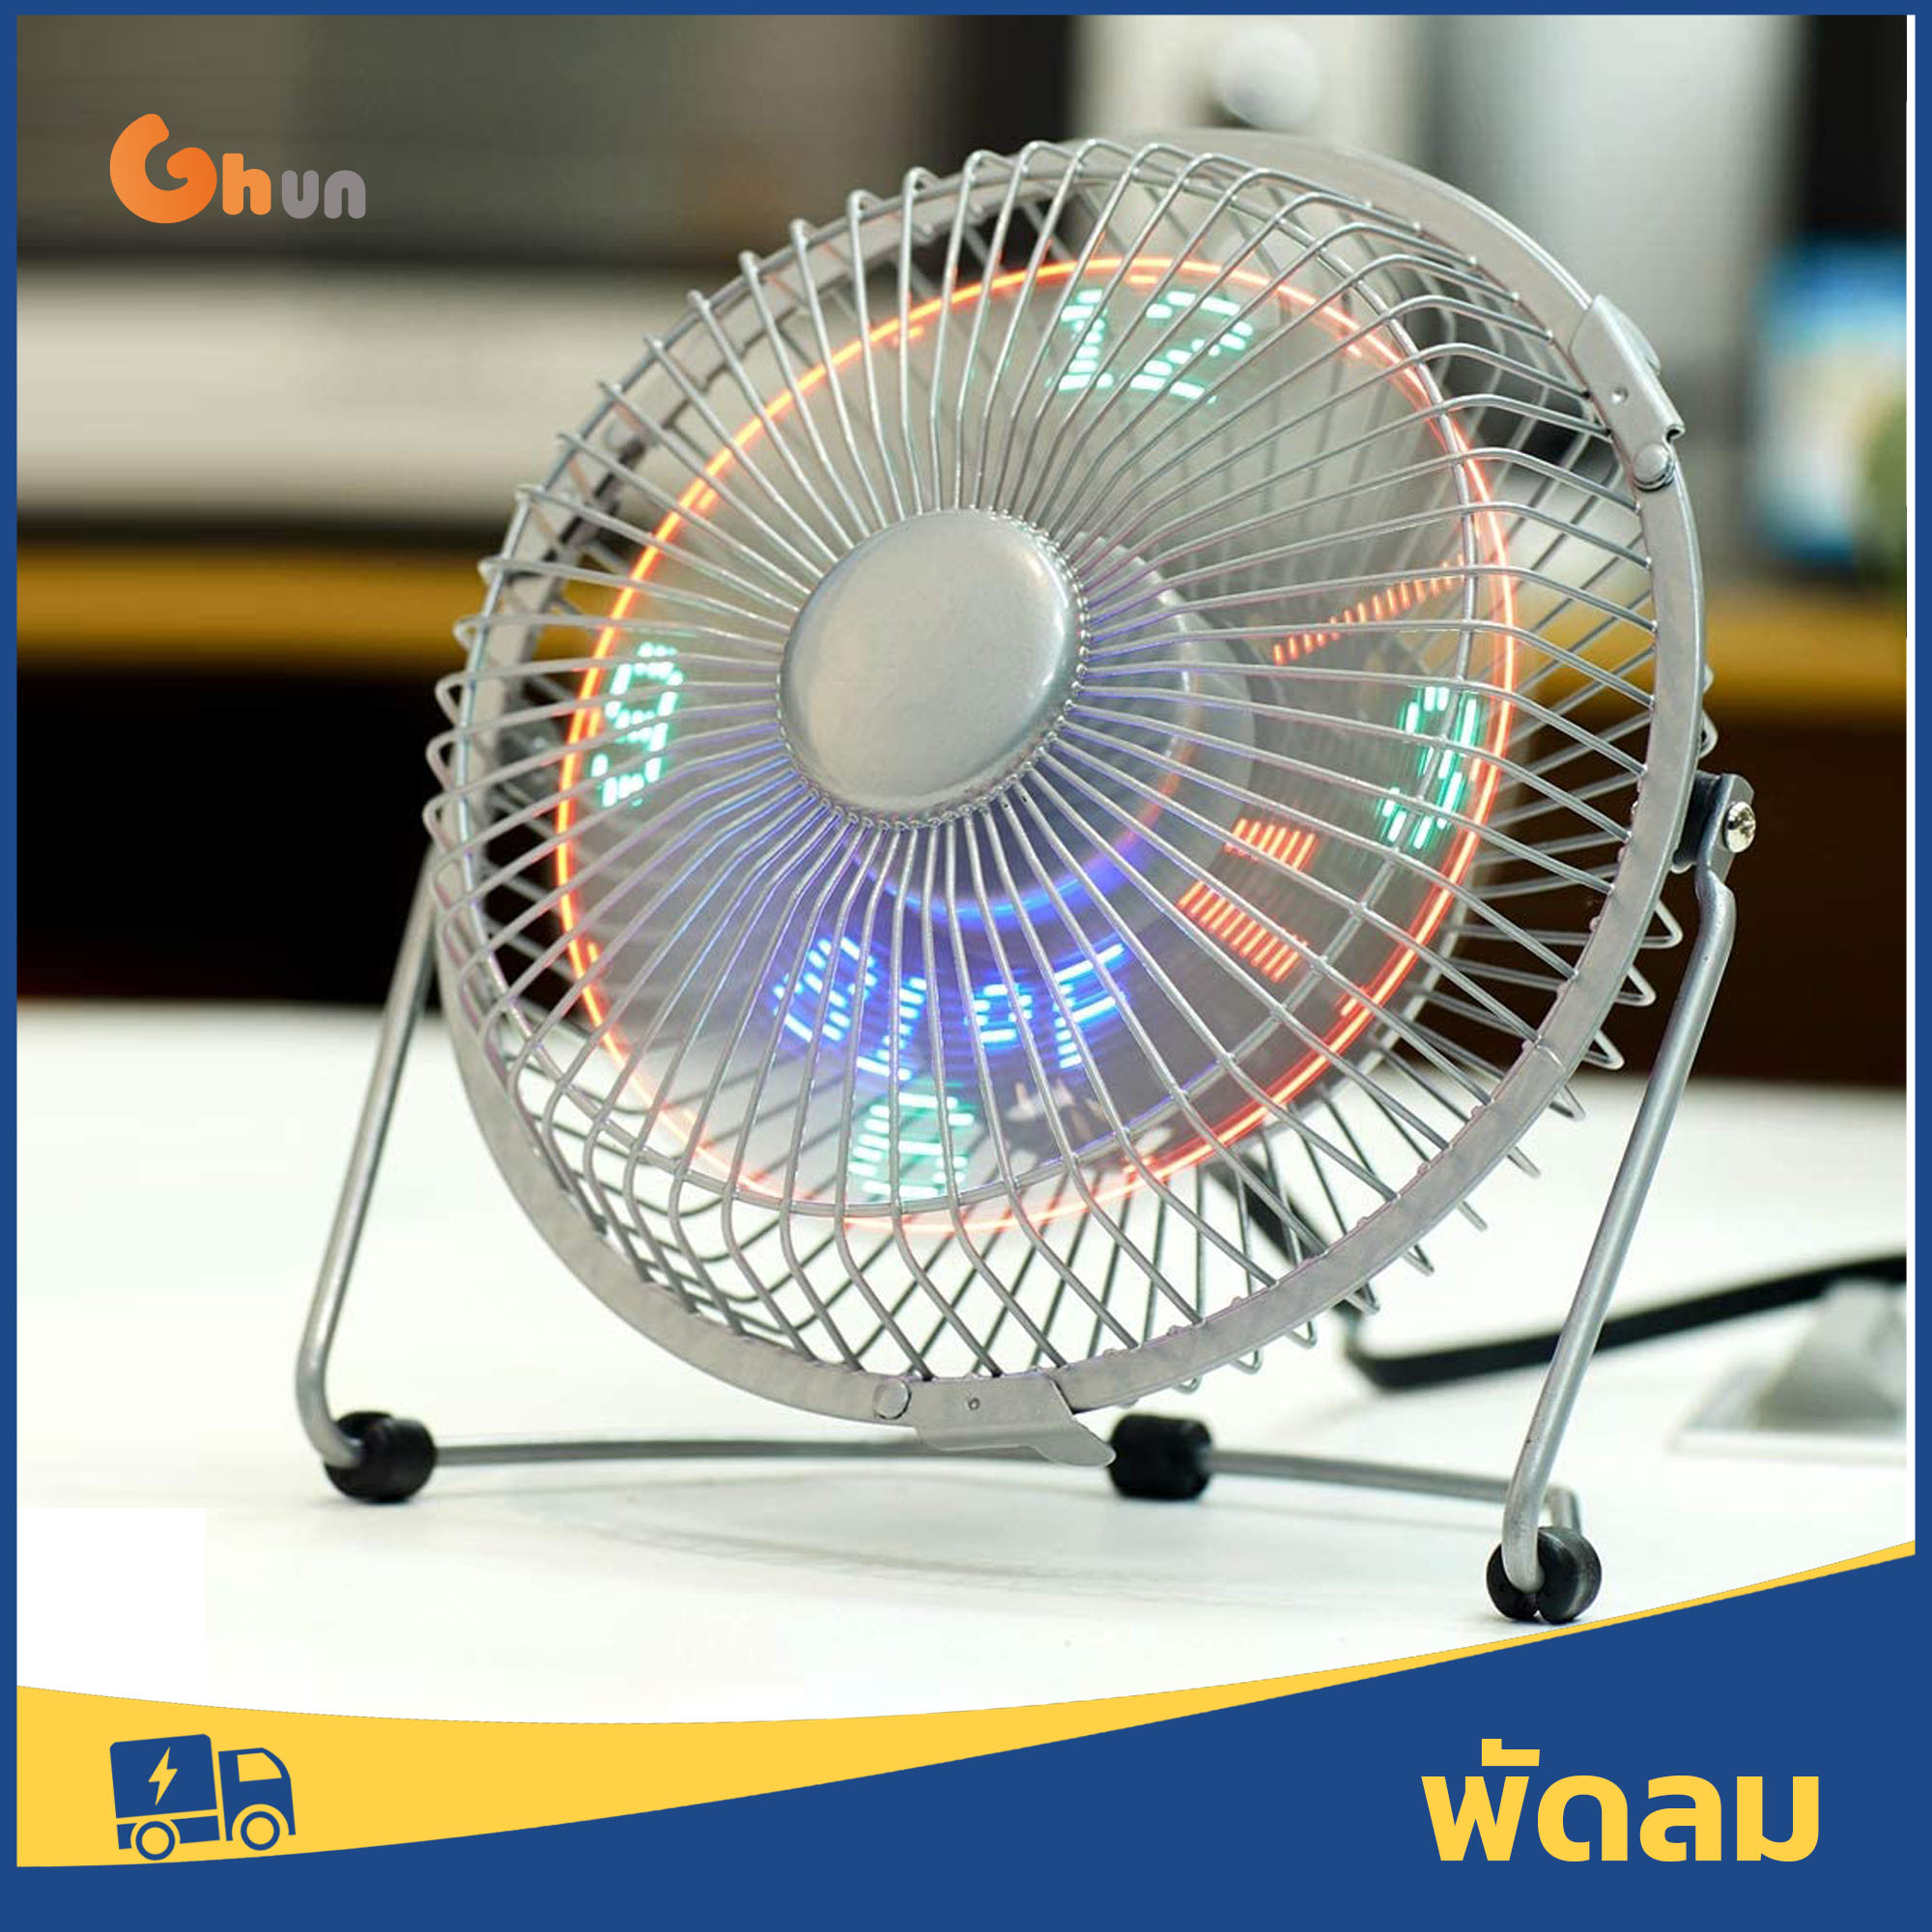 USB LED Fan, Portable Desk Fan with Real Time Date and Temperature Display Personal Table Cooling Fan 360°Rotation Durable for Home and Office (Metal Design Low Noise)